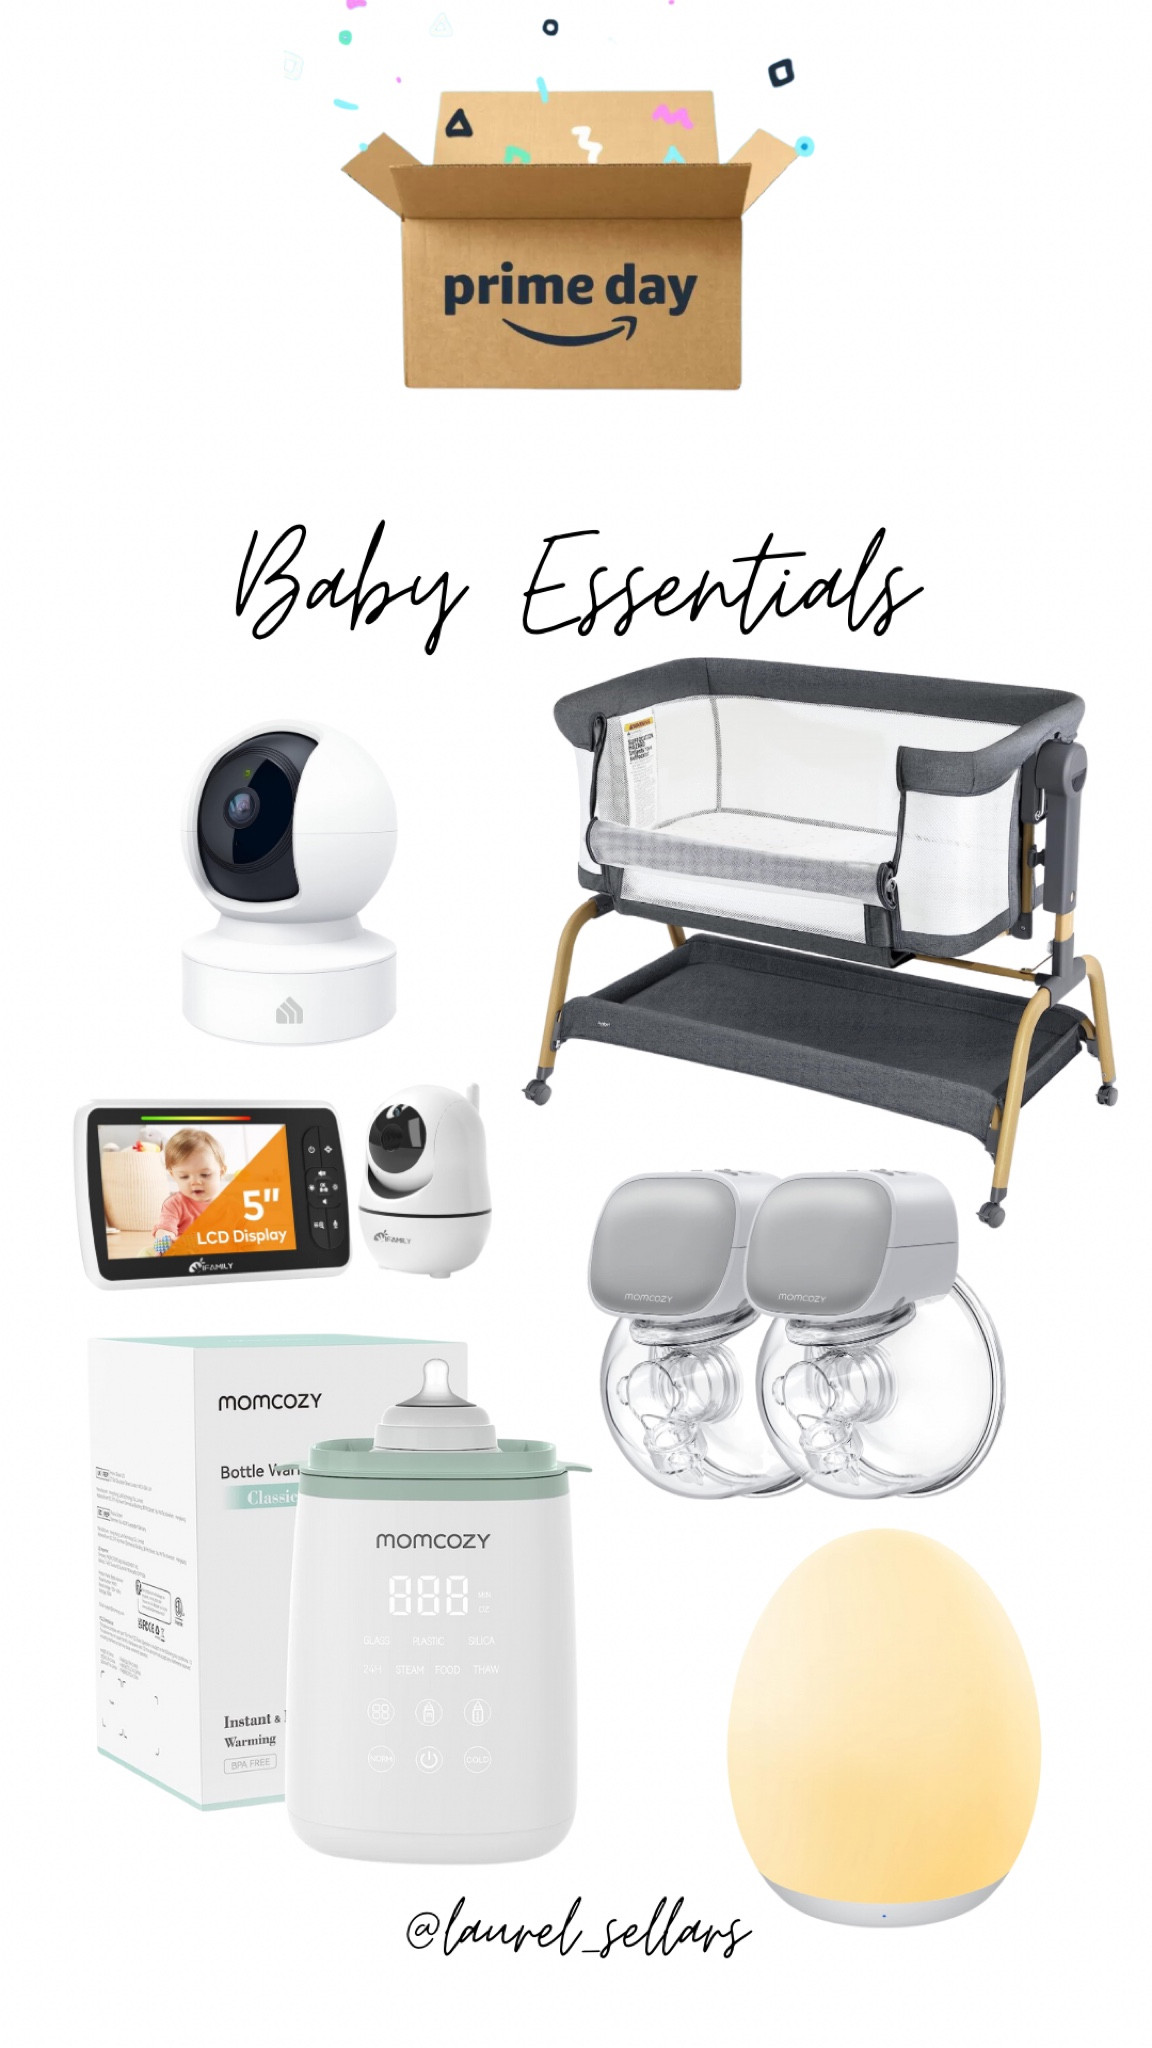 One Momcozy Baby Monitor and One Retractable Baby Gate